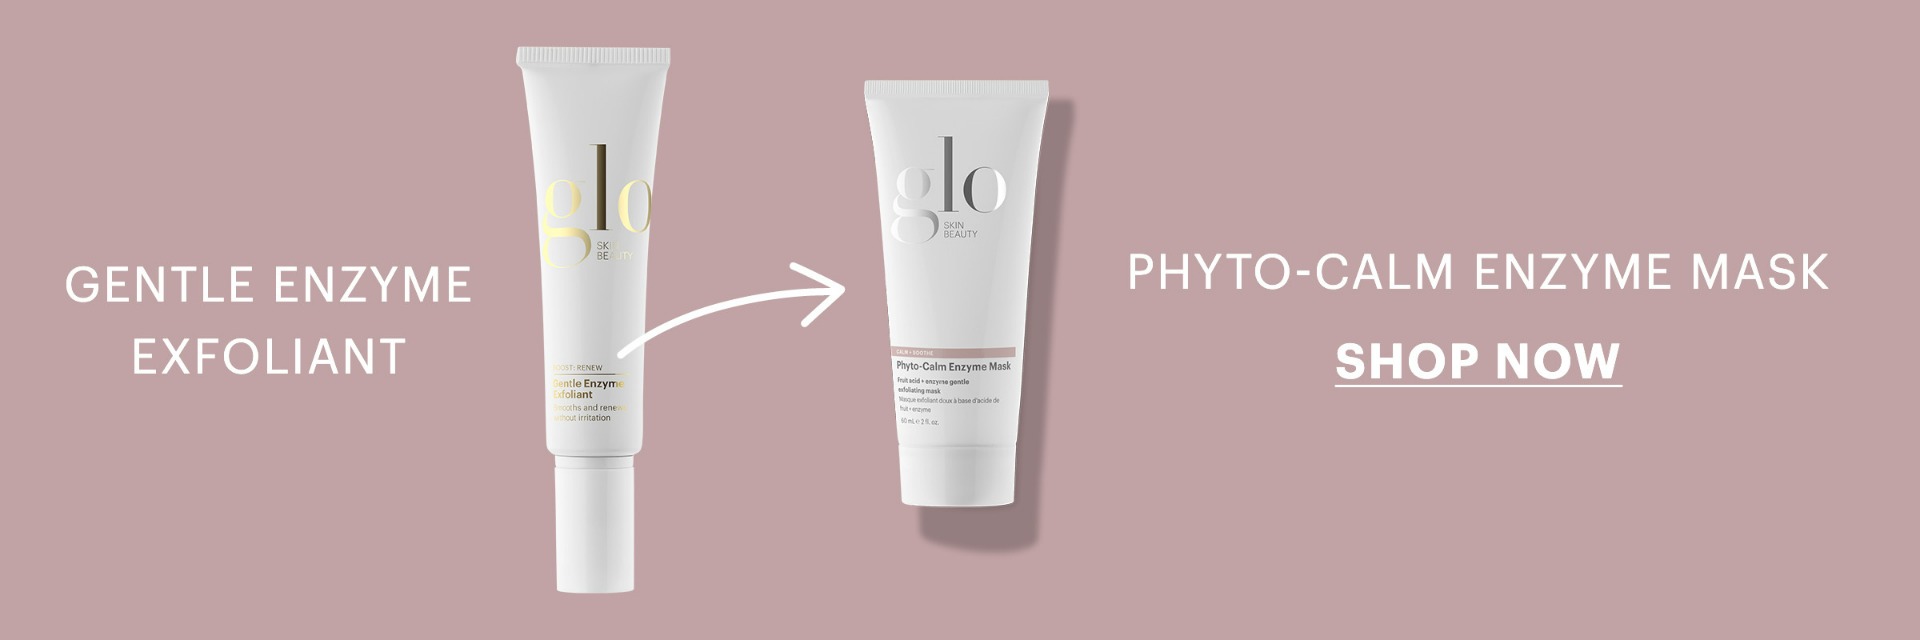 Phyto-Calm Enzyme Mask